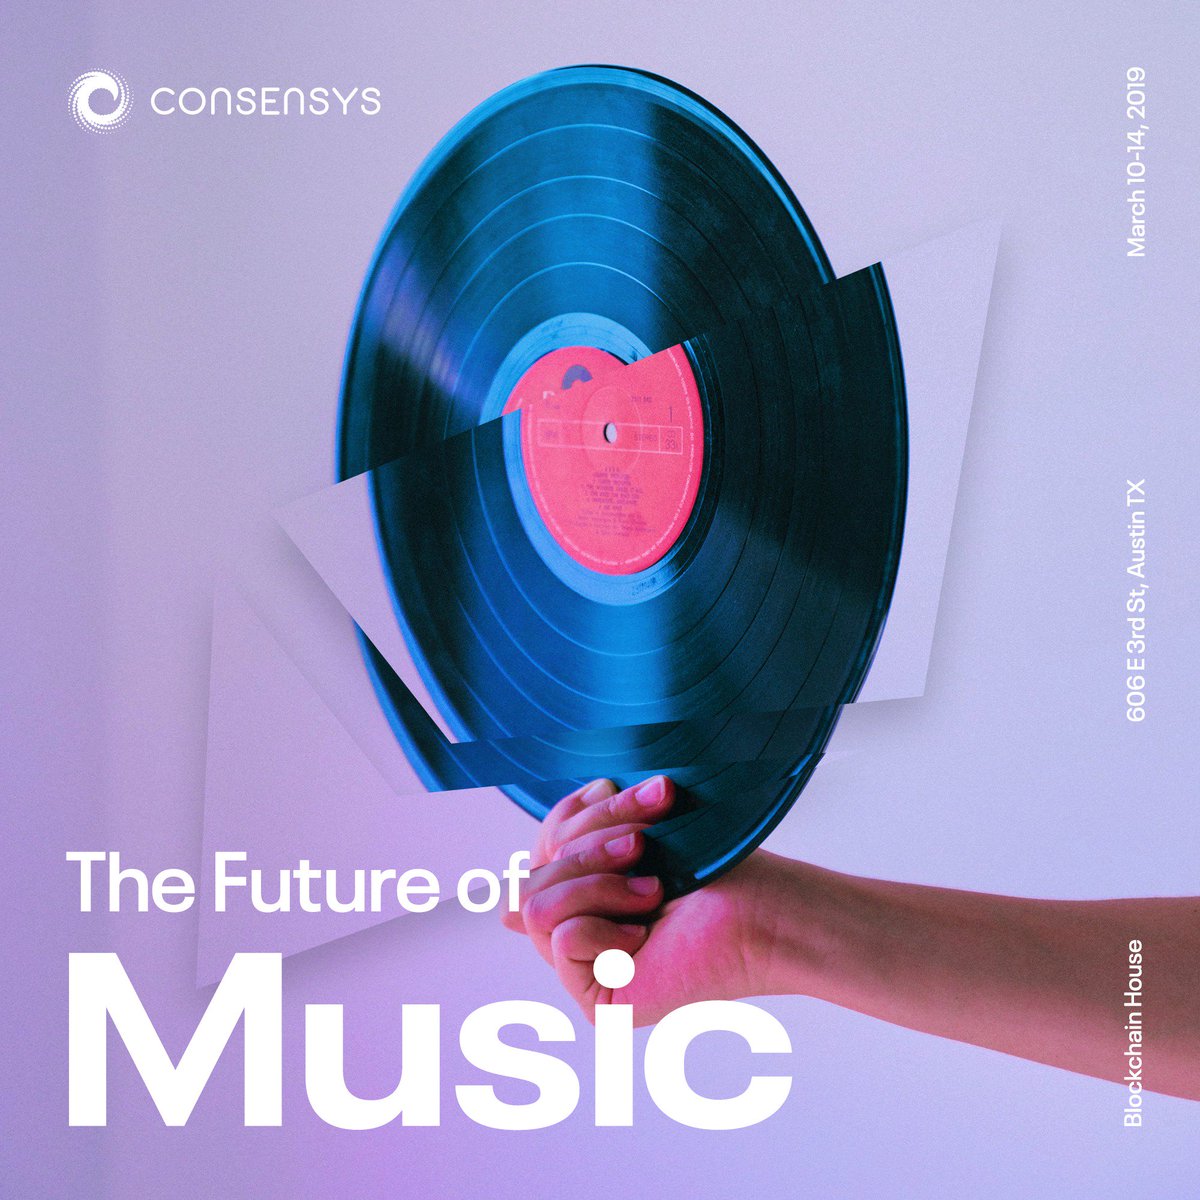 #EtherealSXSW ~ The Future of Music Looking forward to a conversation with @boughb (Founder, Bonin Ventures), Beckie Wood (VP Product-Content, Pandora), @JesseGrushack (Co-Founder, @UjoMusic), and @jwolpert, (@ConsenSys, @web3studio). RSVP today for #BlockchainHouseSXSW